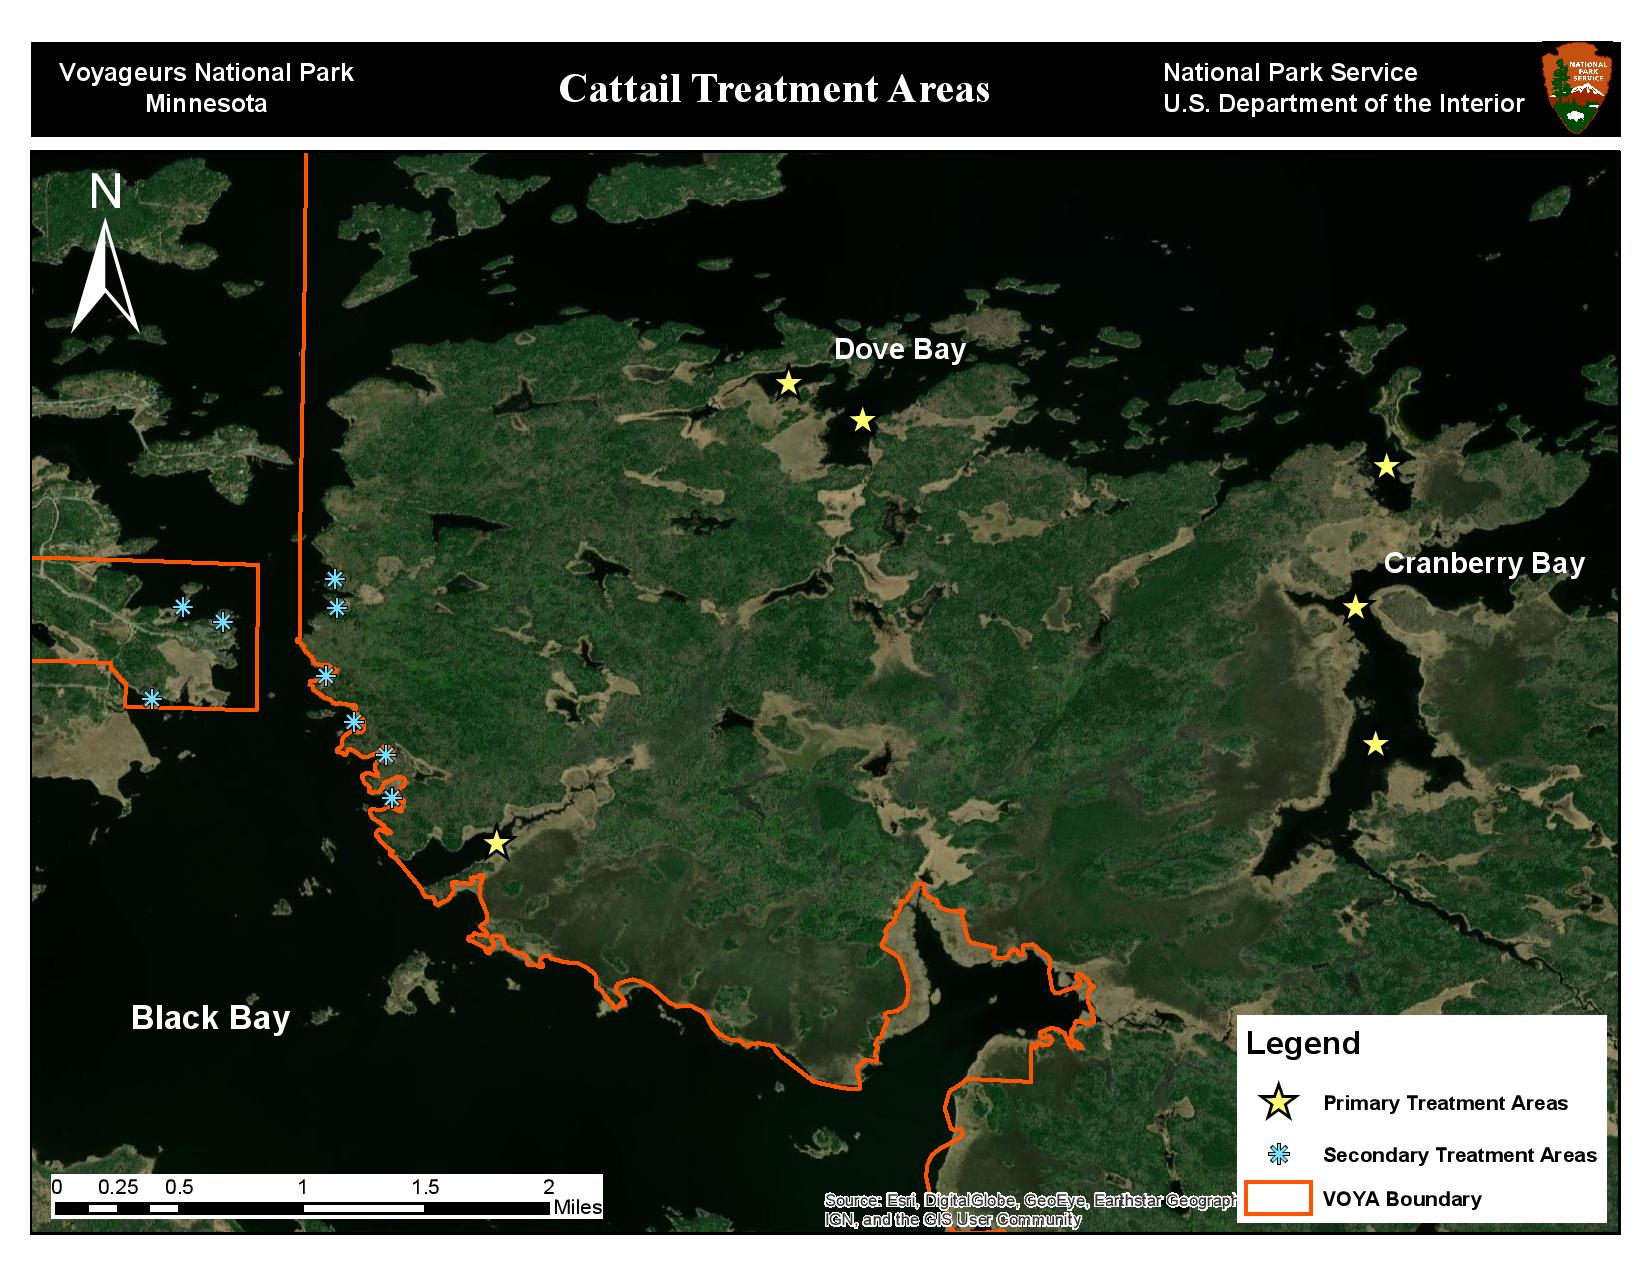 A map of the park showing cattail primary and secondary treatment areas.  Spots in Dove Bay and Cranberry Bay are shown as primary treatment areas.